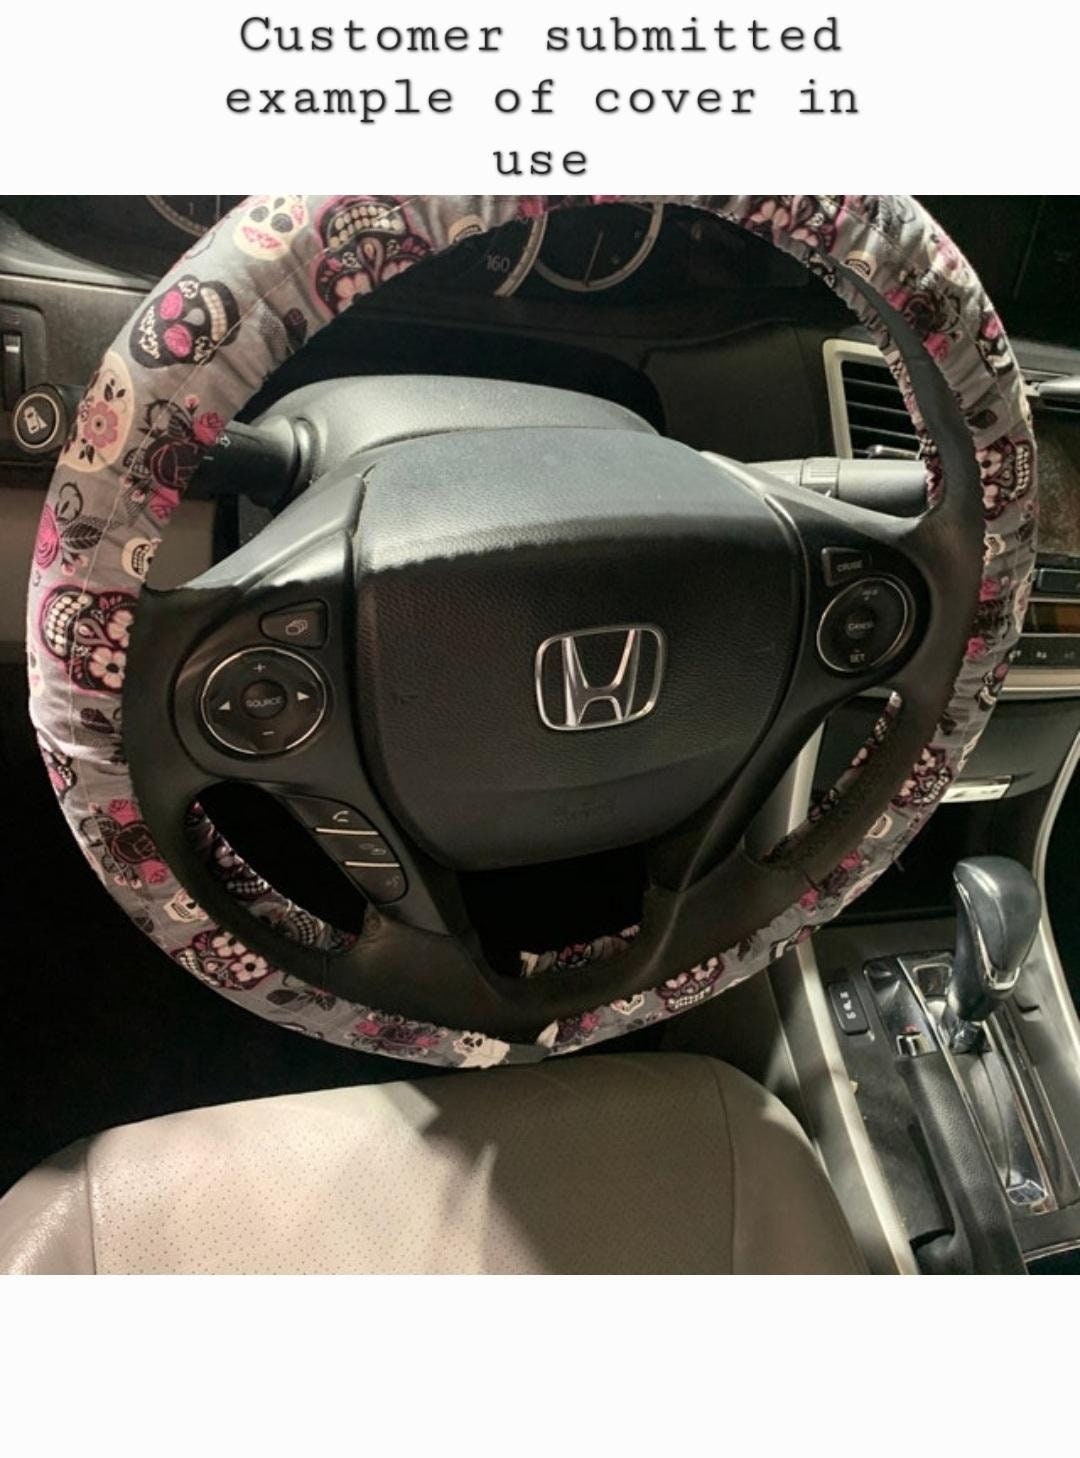 Mini Floral Steering Wheel Cover, 100% Cotton, Washable, Custom Car Accessories - Harlow's Store and Garden Gifts